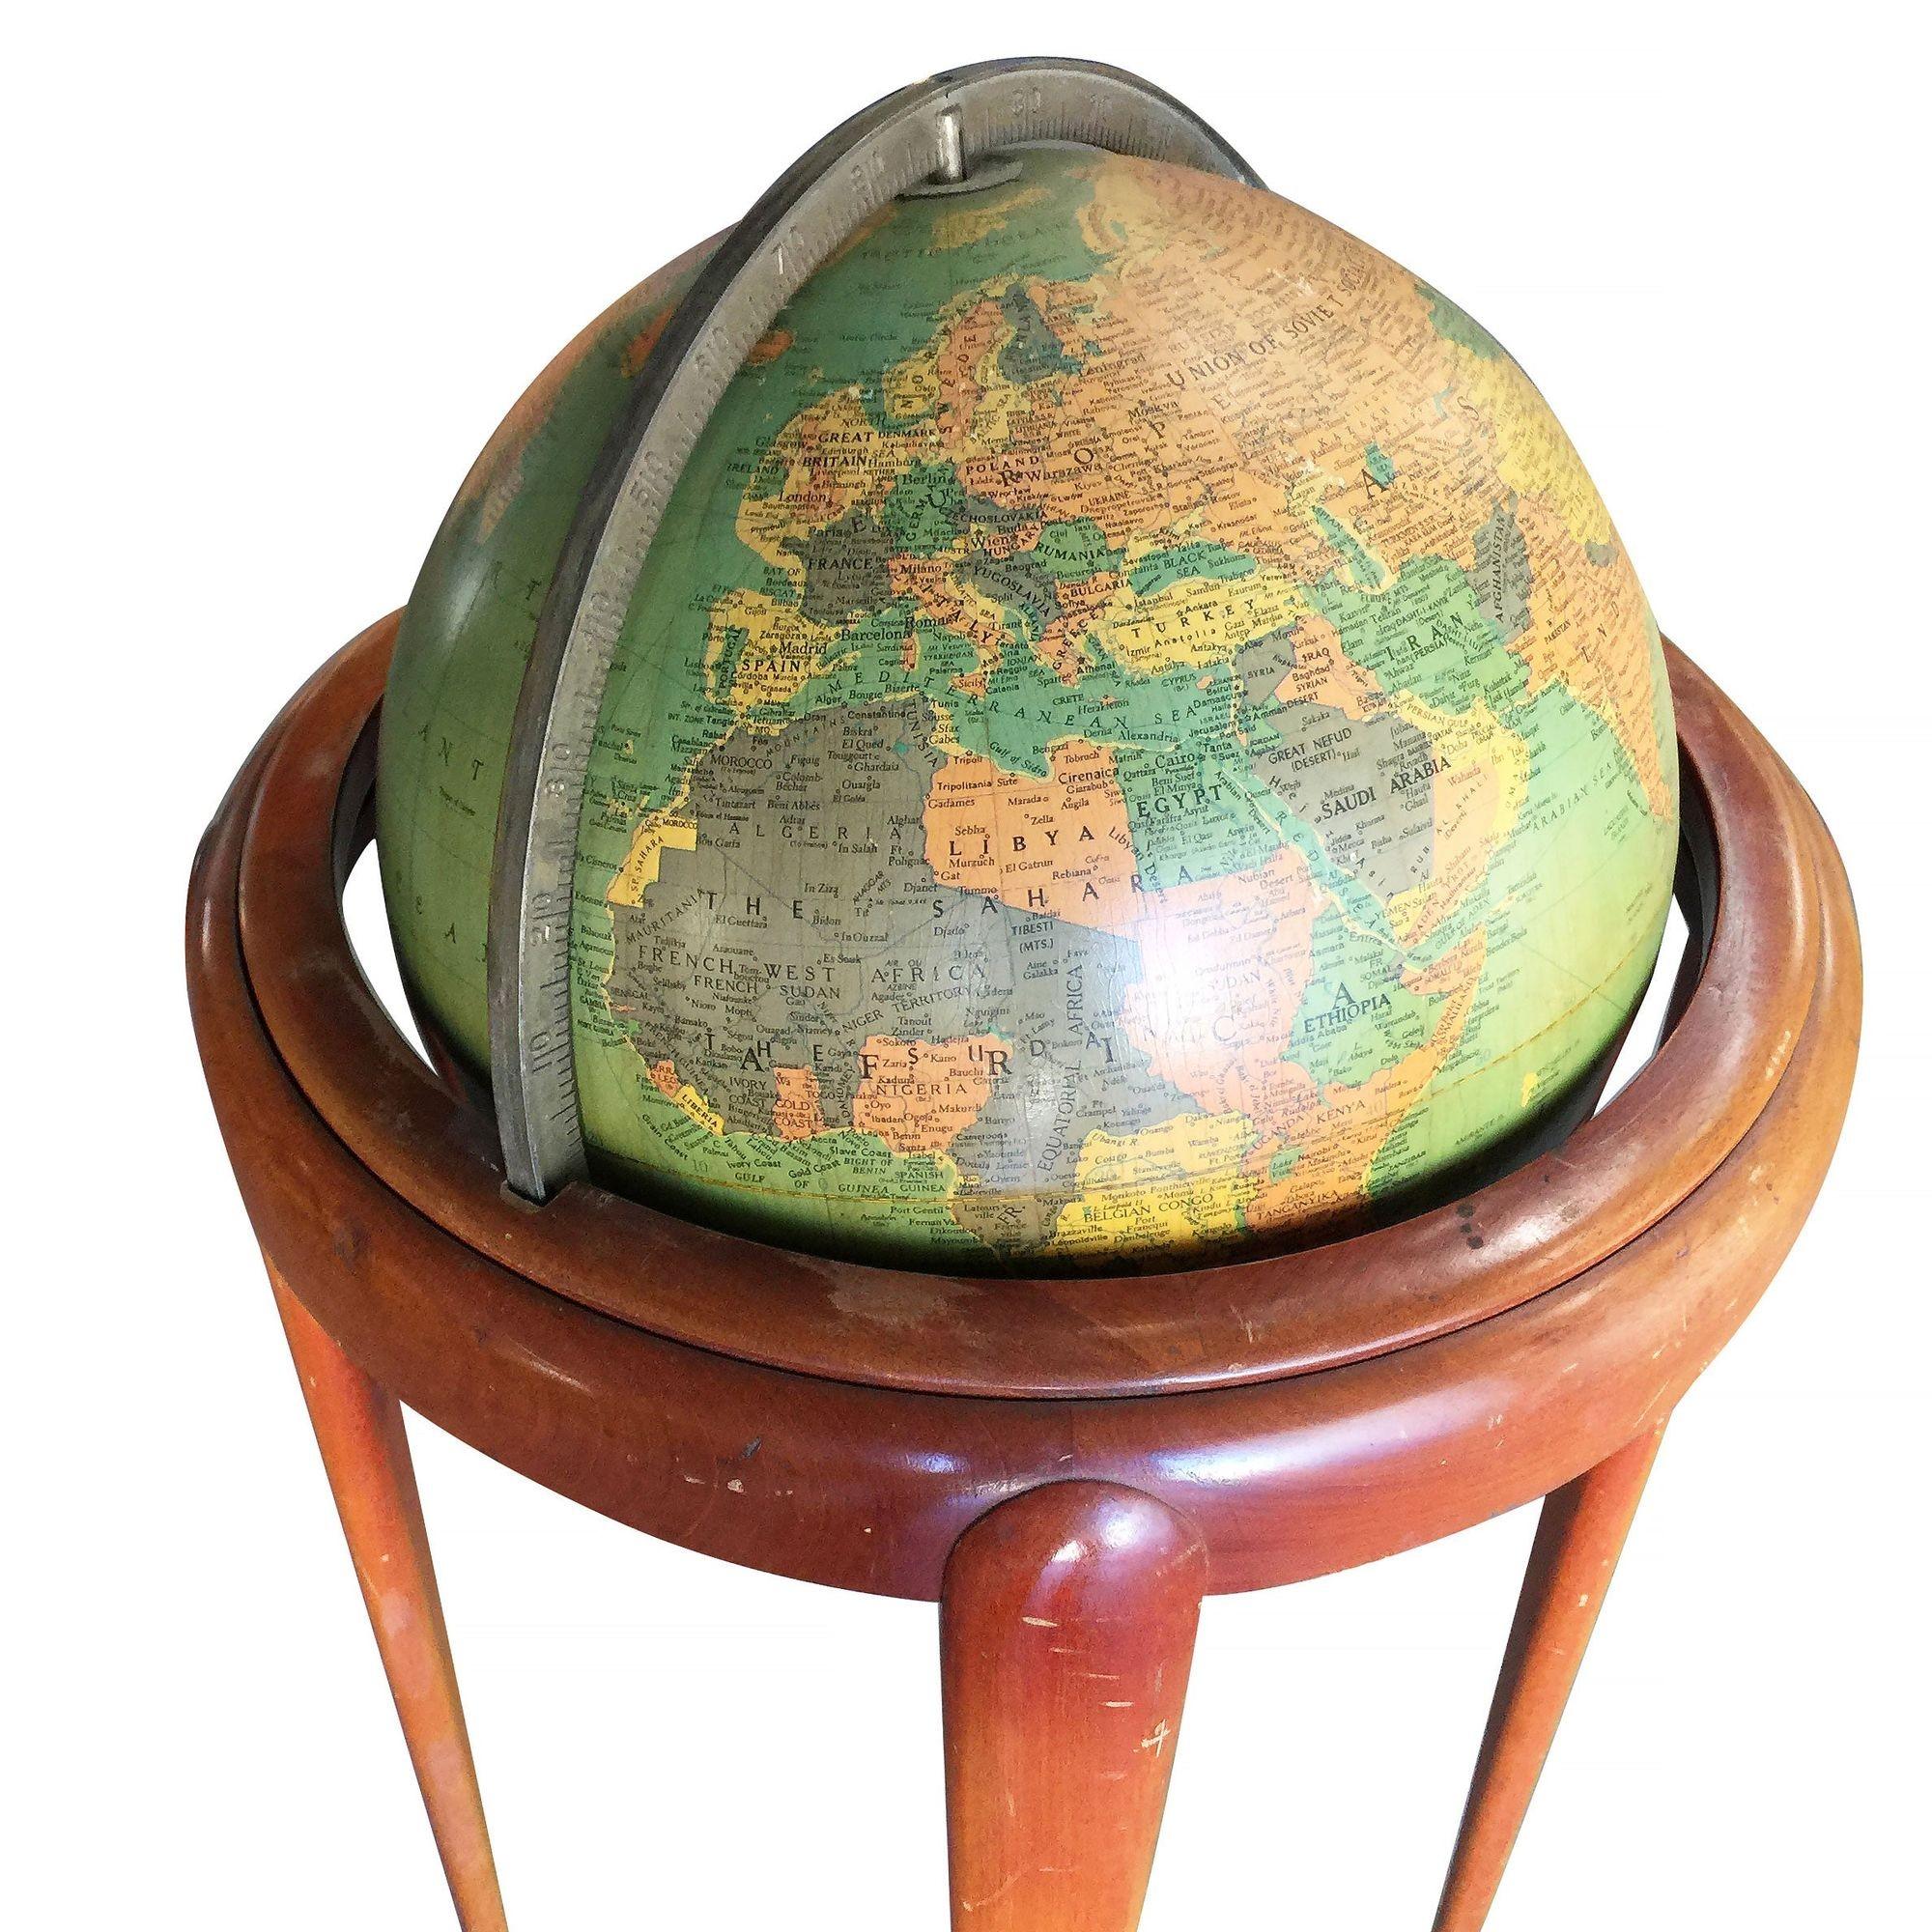 Mid-century era floor globe featuring a steel globe suspended by a mahogany stand. The globe rotates 360 degrees on two point axis comprised of metal ball bearings.

Manufactured by Replogle.